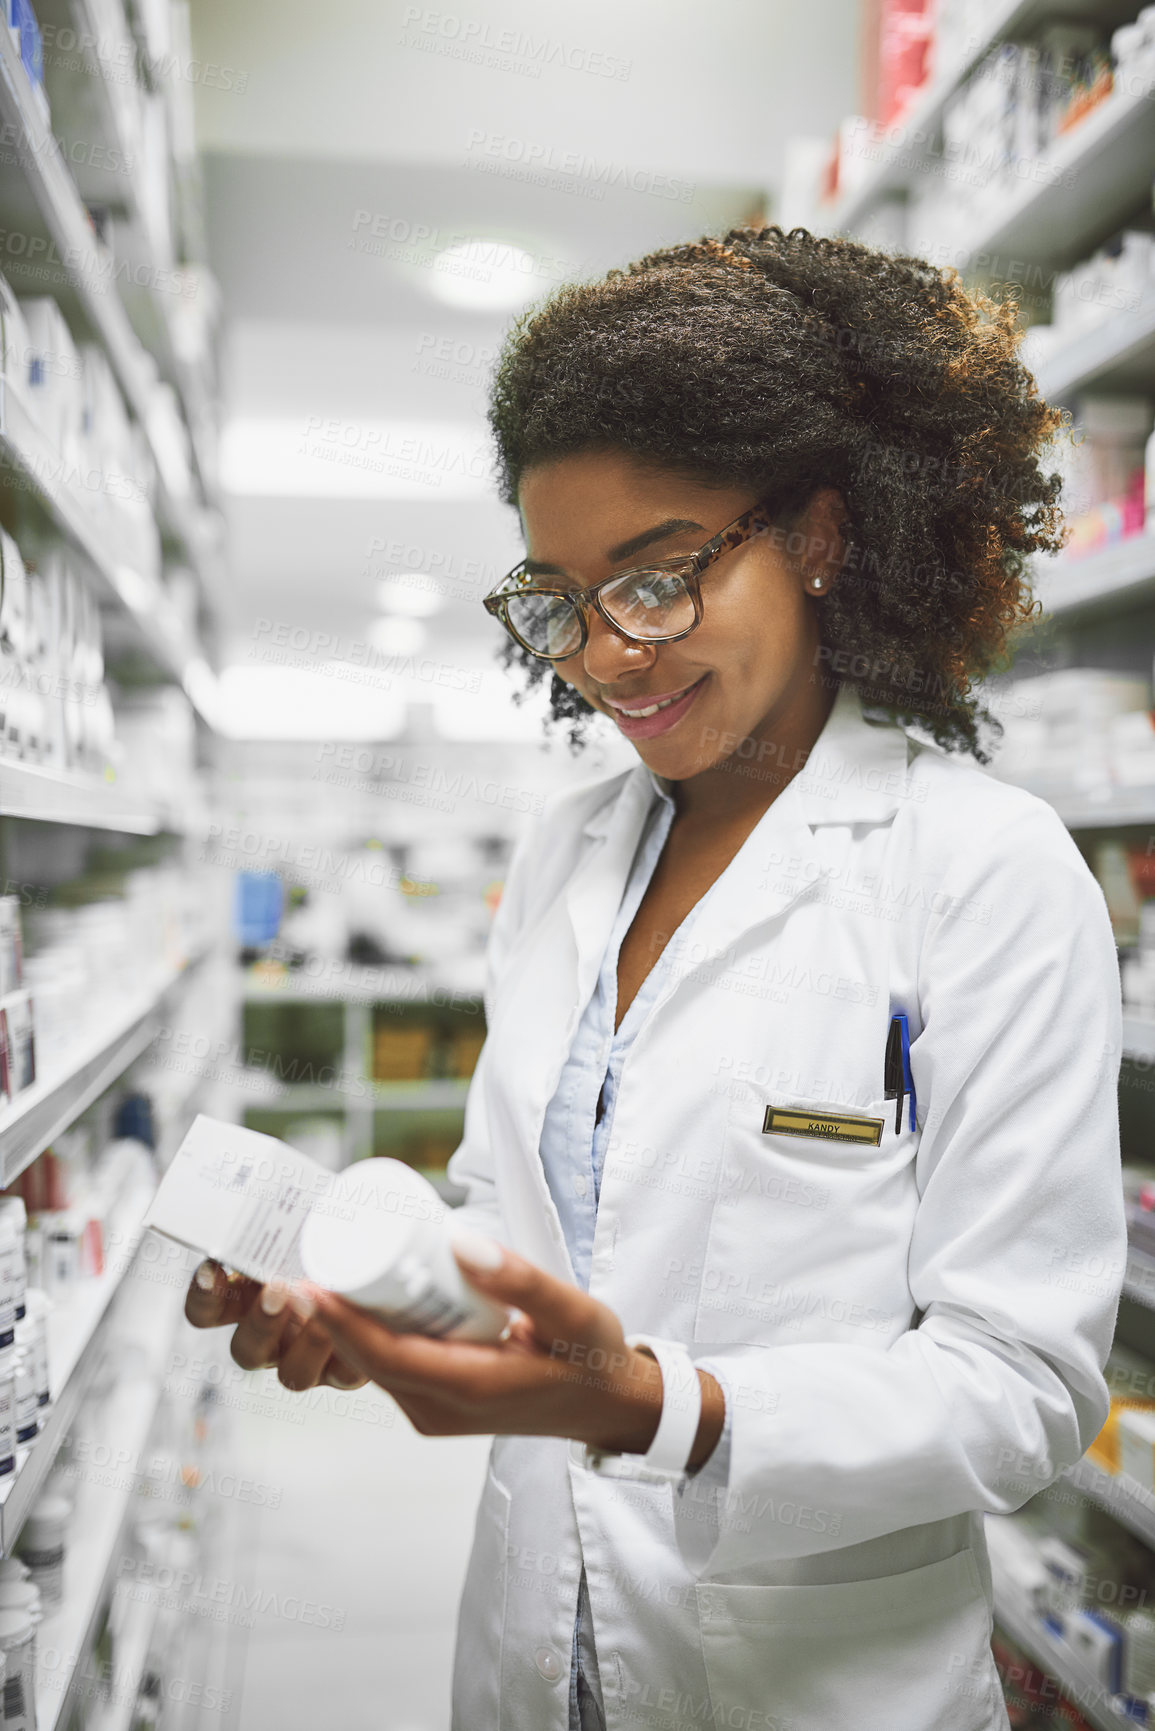 Buy stock photo Shot of a cheerful young female pharmacist holding two different types of medication in each hand in a pharmacy